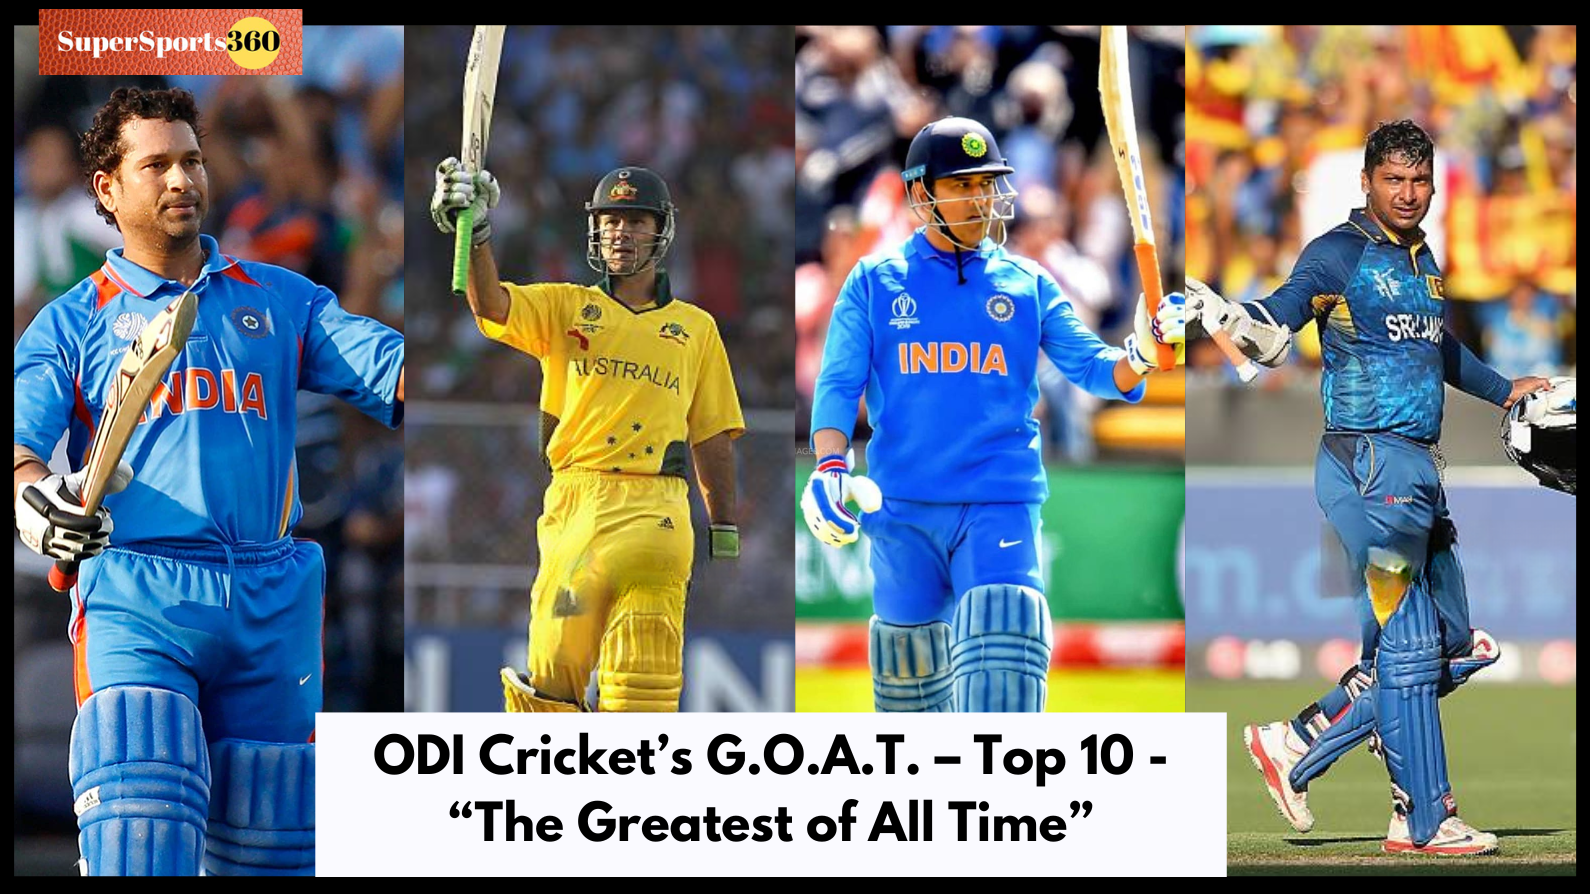 ODI Cricket’s G.O.A.T. – Top 10 - “The Greatest of All Time”